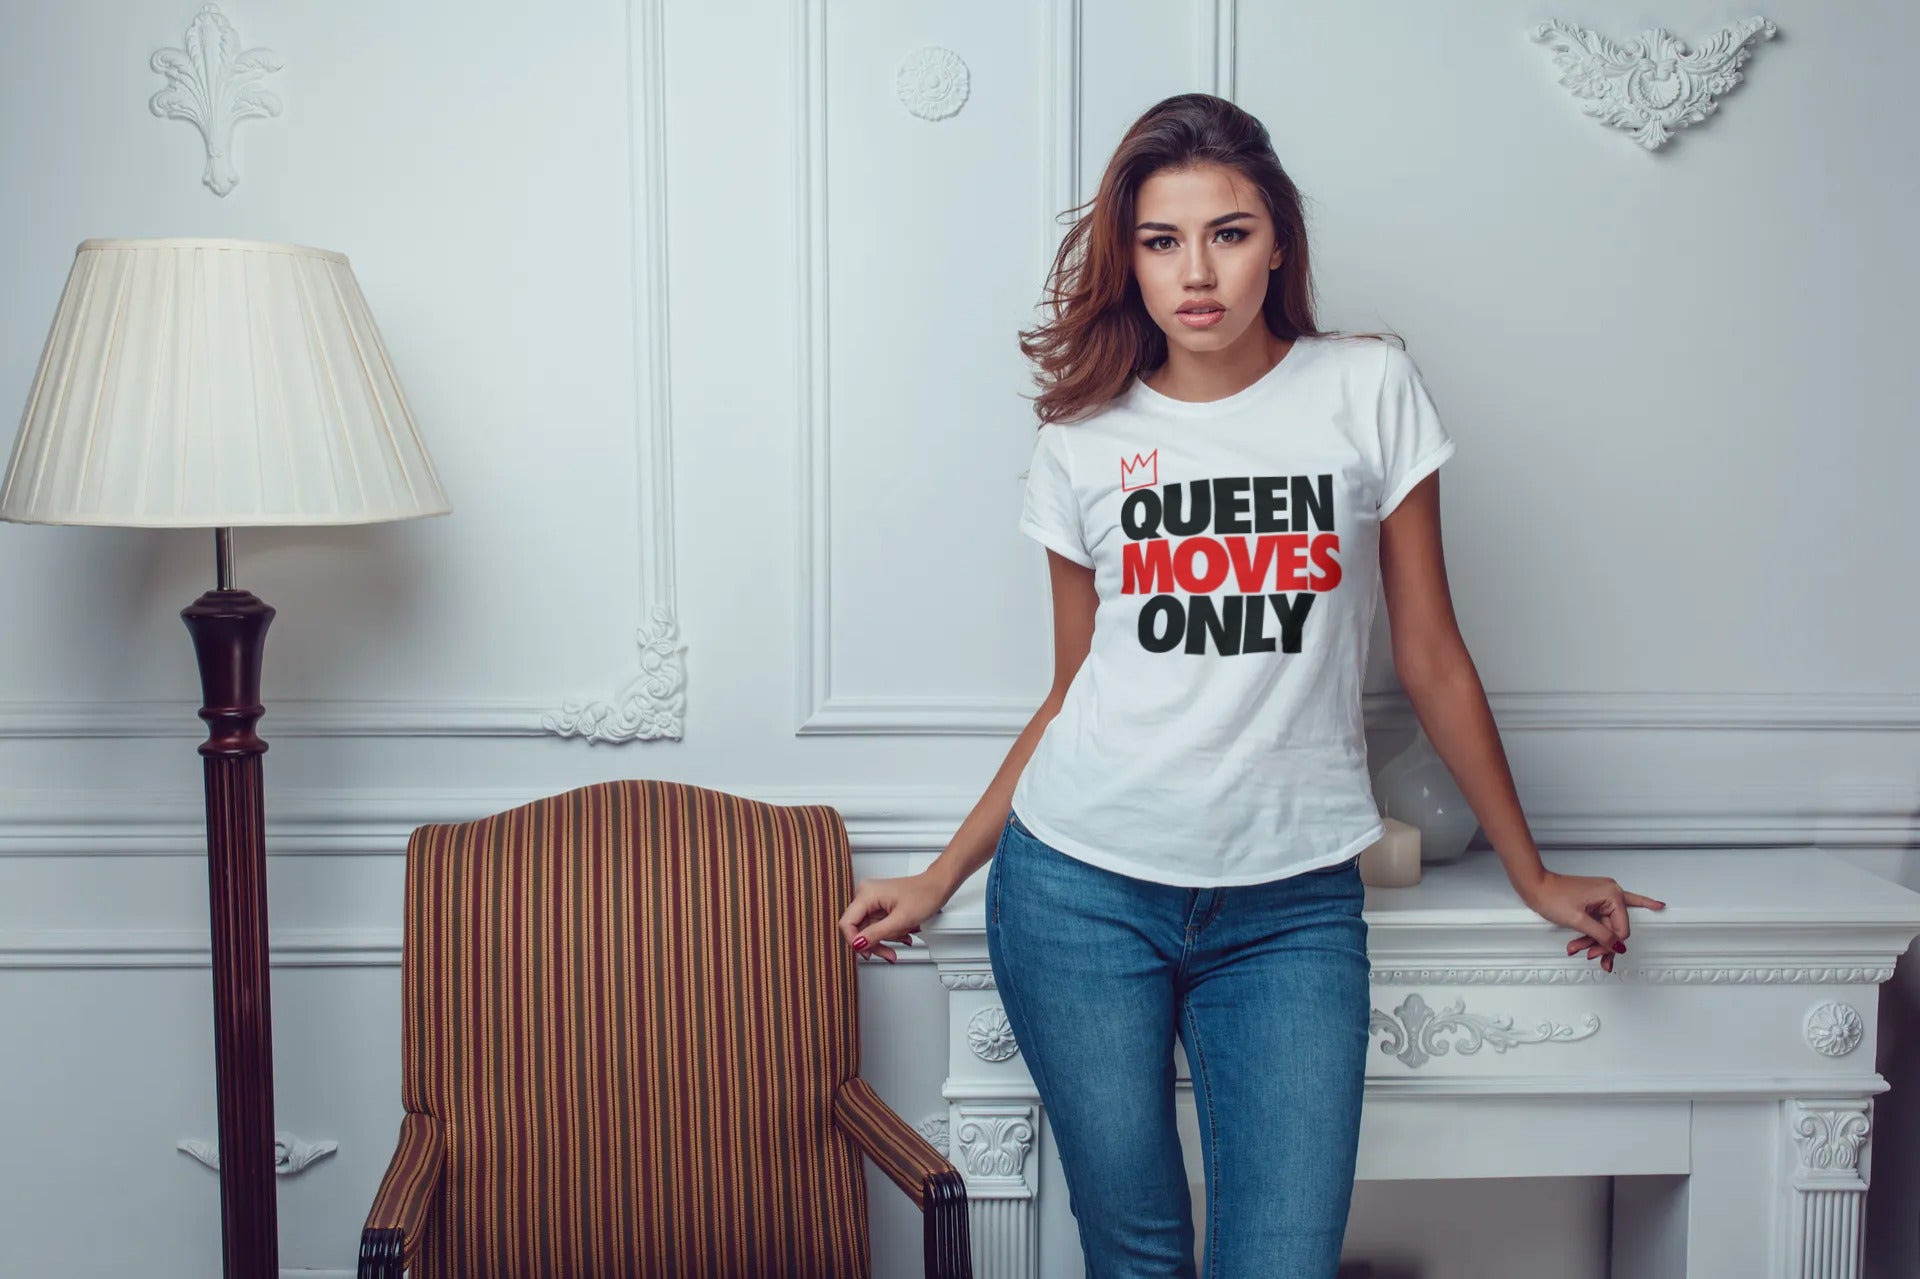 "Queen Moves Only" T-Shirt